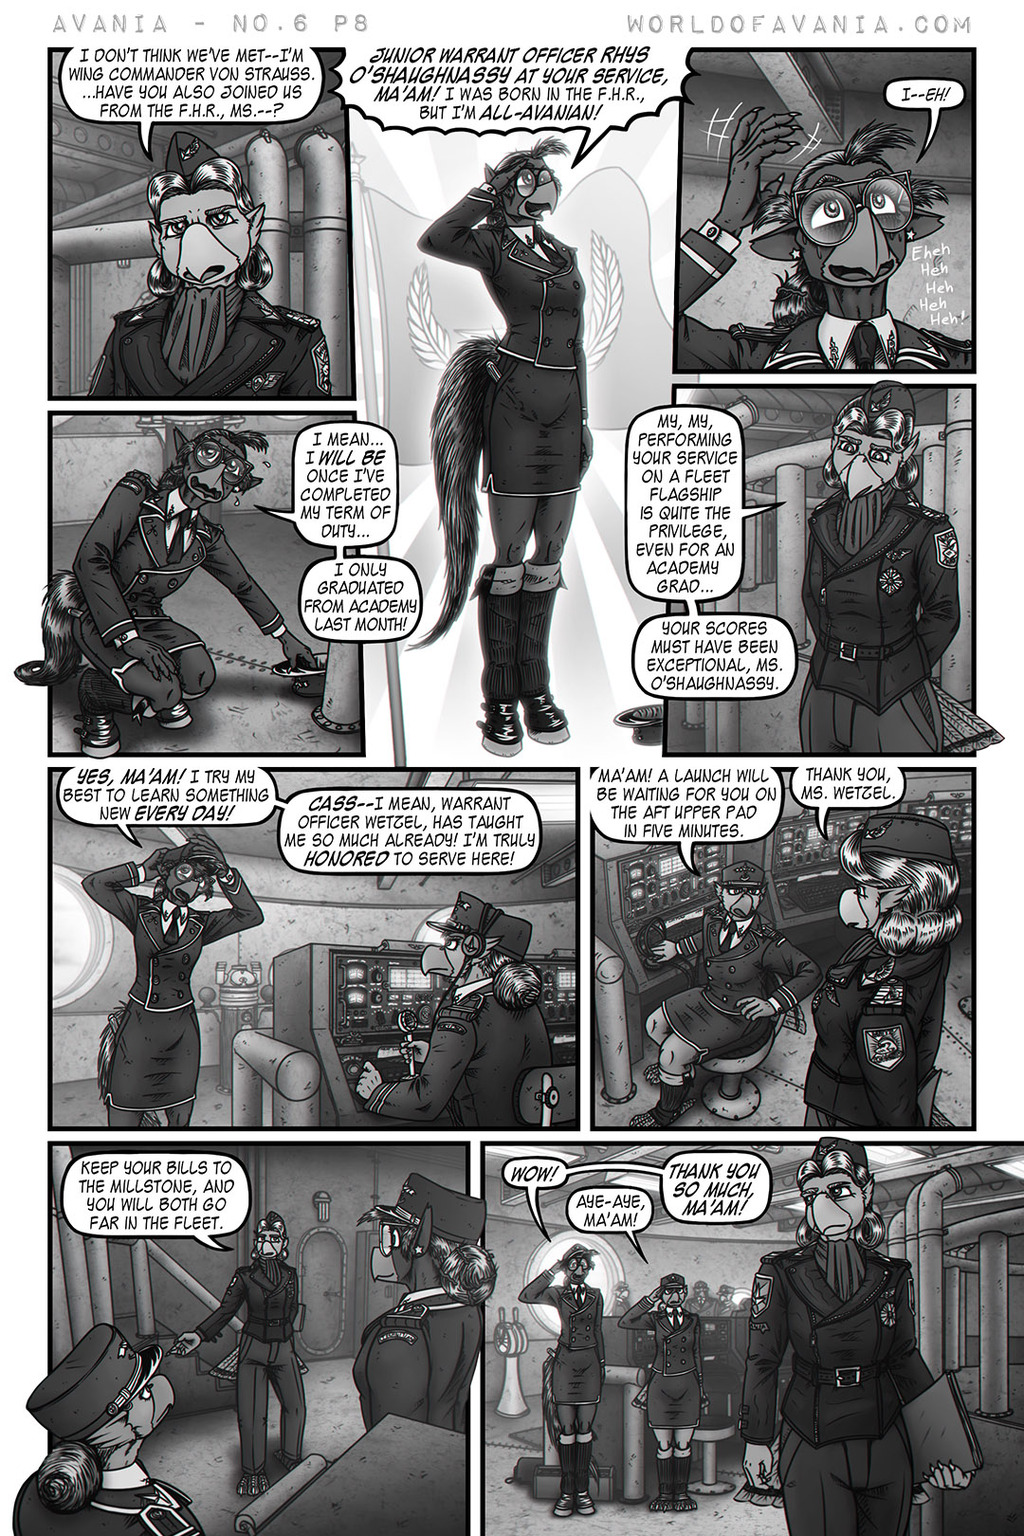 Avania Comic - Issue No.6, Page 8